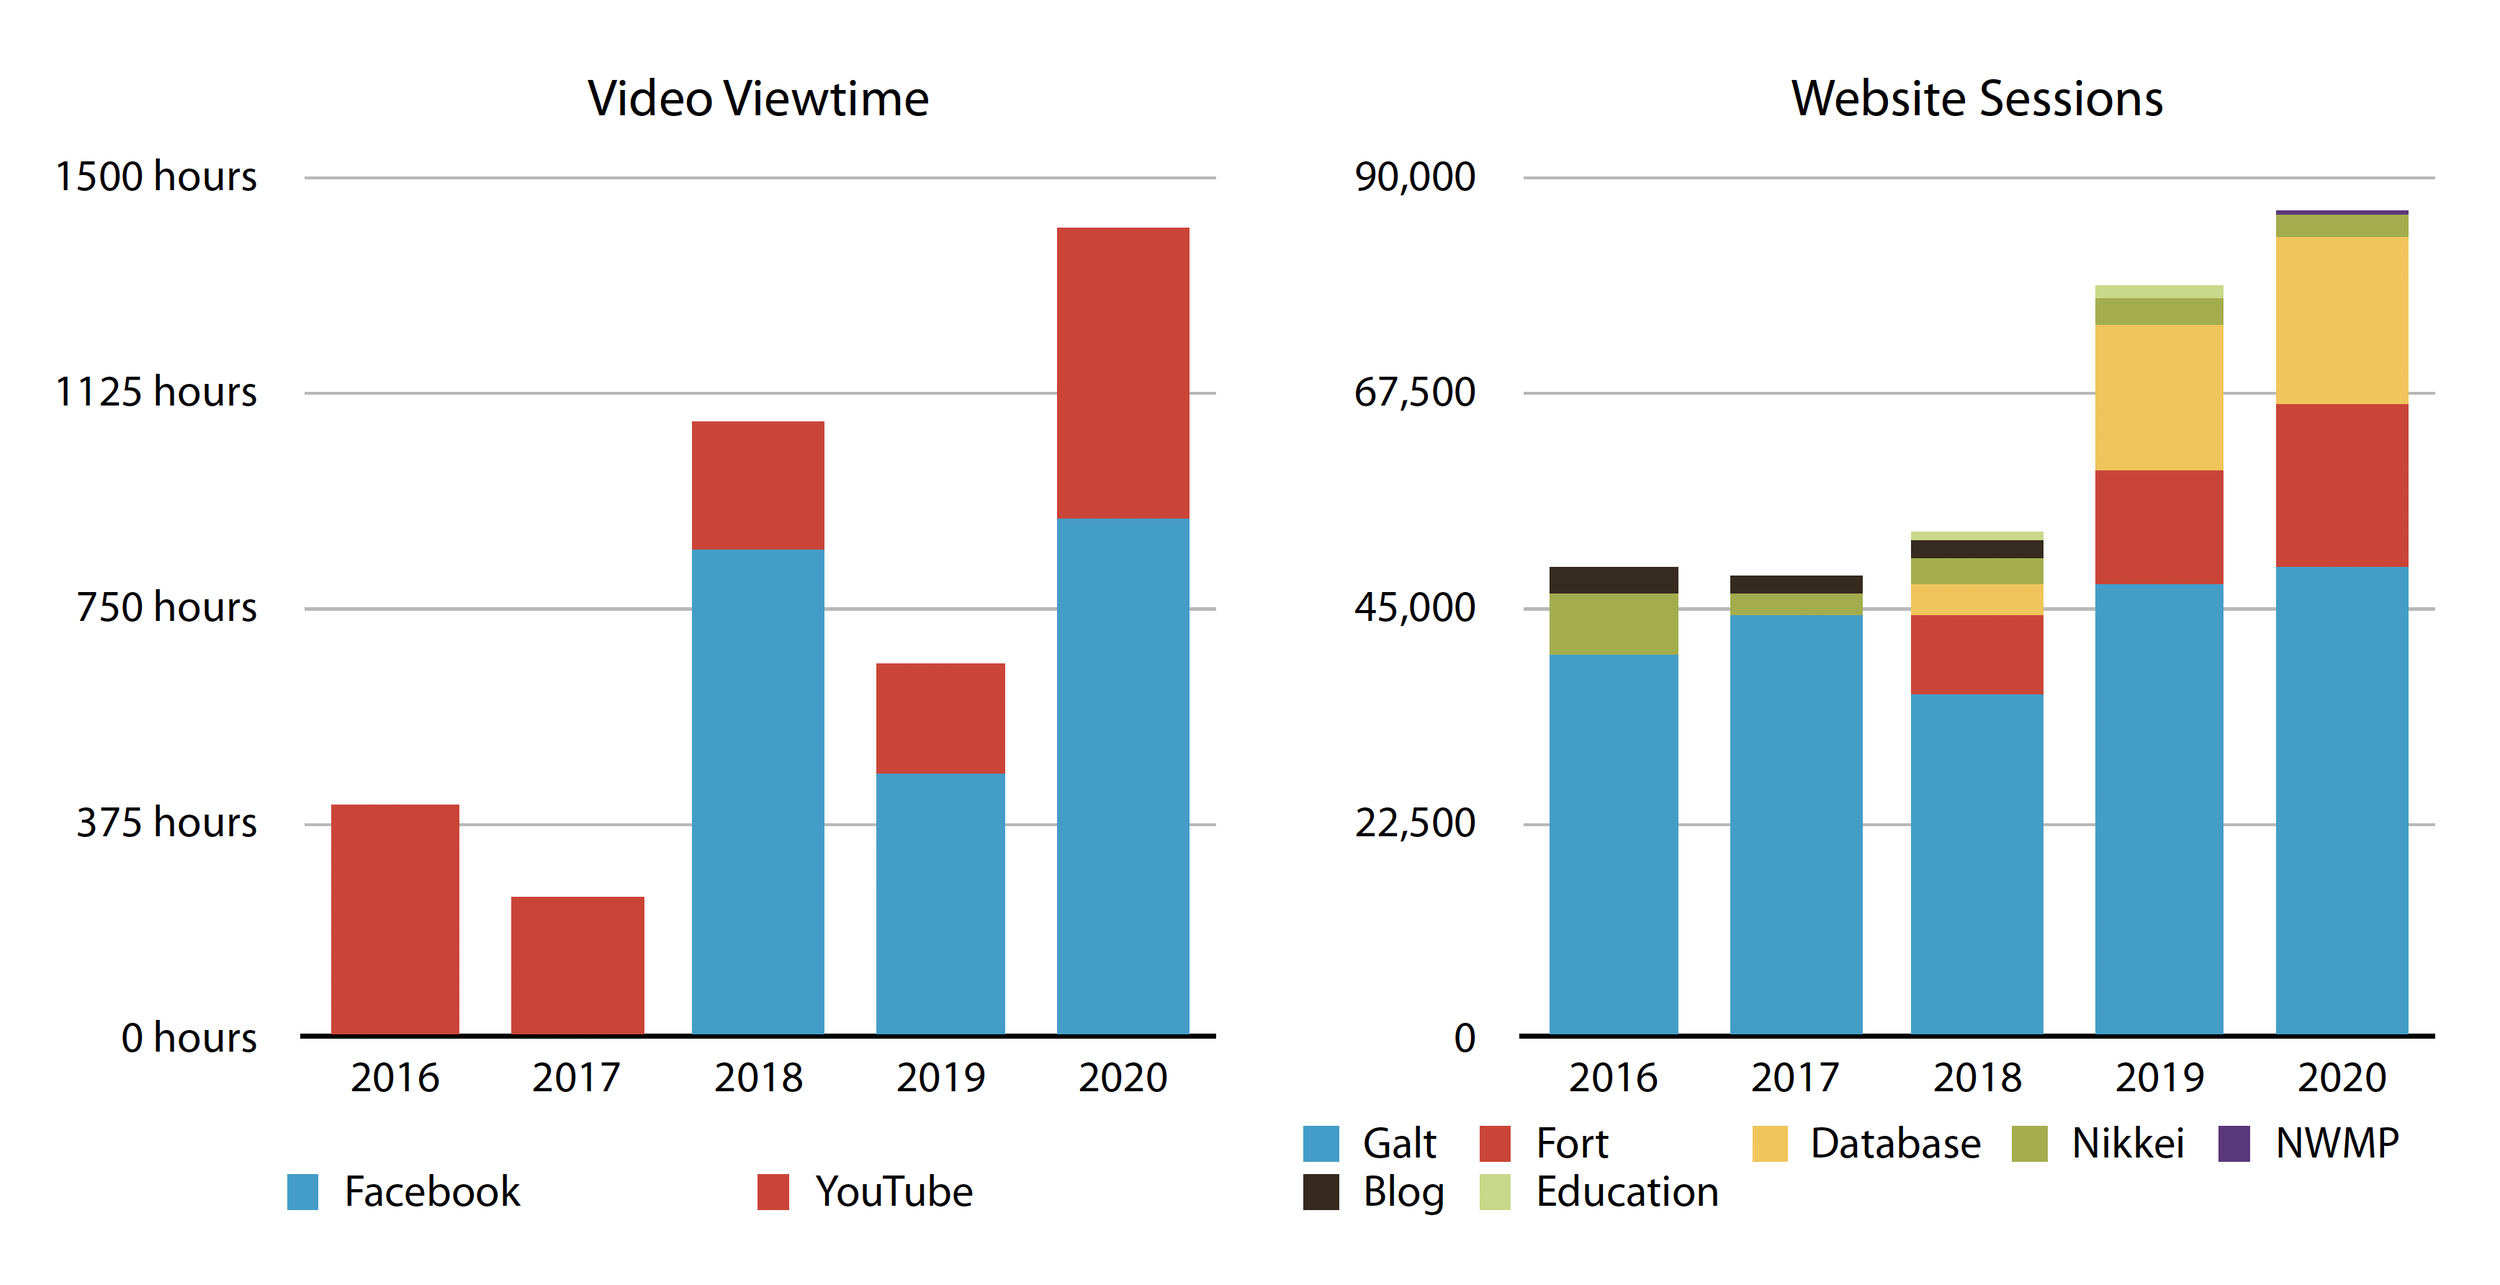 annual-report-charts-website-sessions-video-viewtimes.png